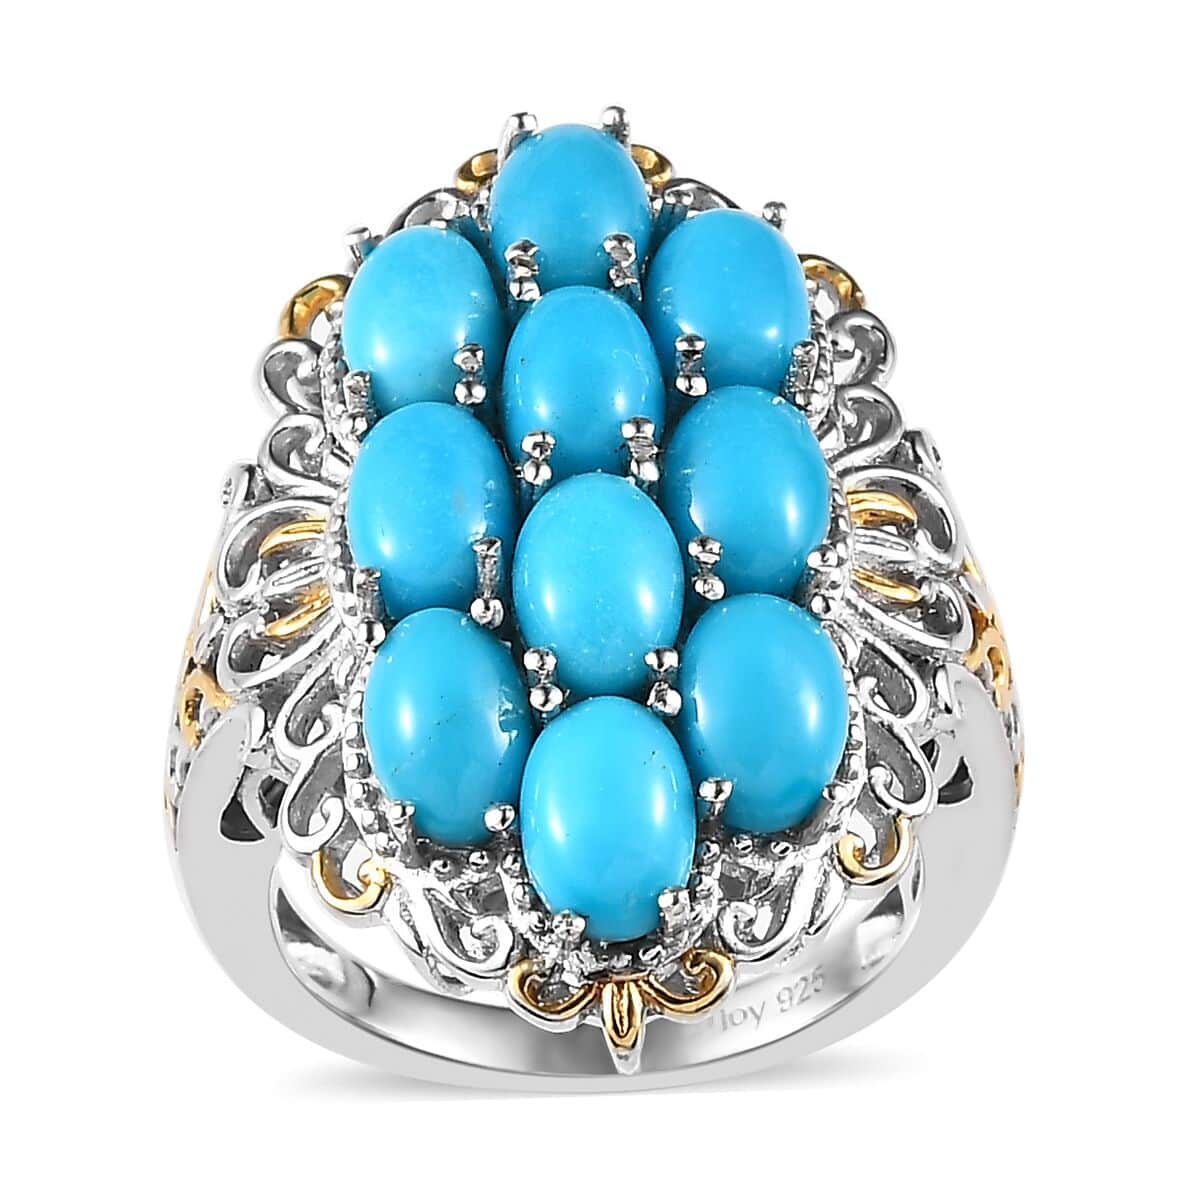 Buy Sleeping Beauty Turquoise Ring in Vermeil YG and Platinum Over